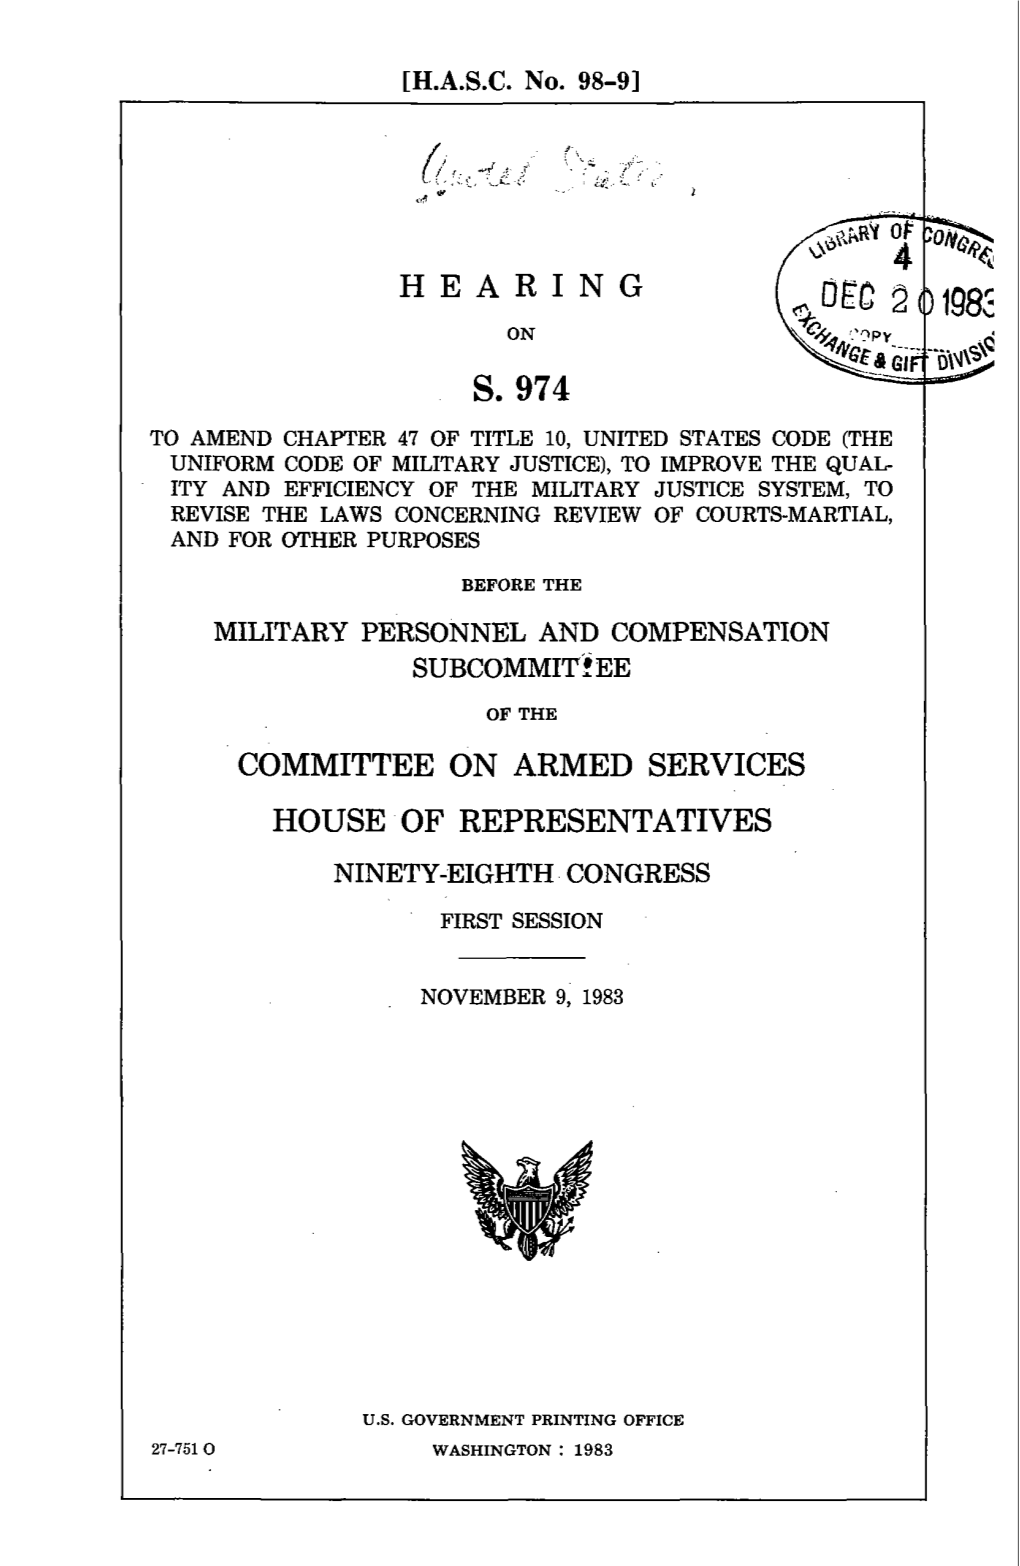 Hearing on S. 974 to Amend Chapter 47 of Titles 10. United States Code